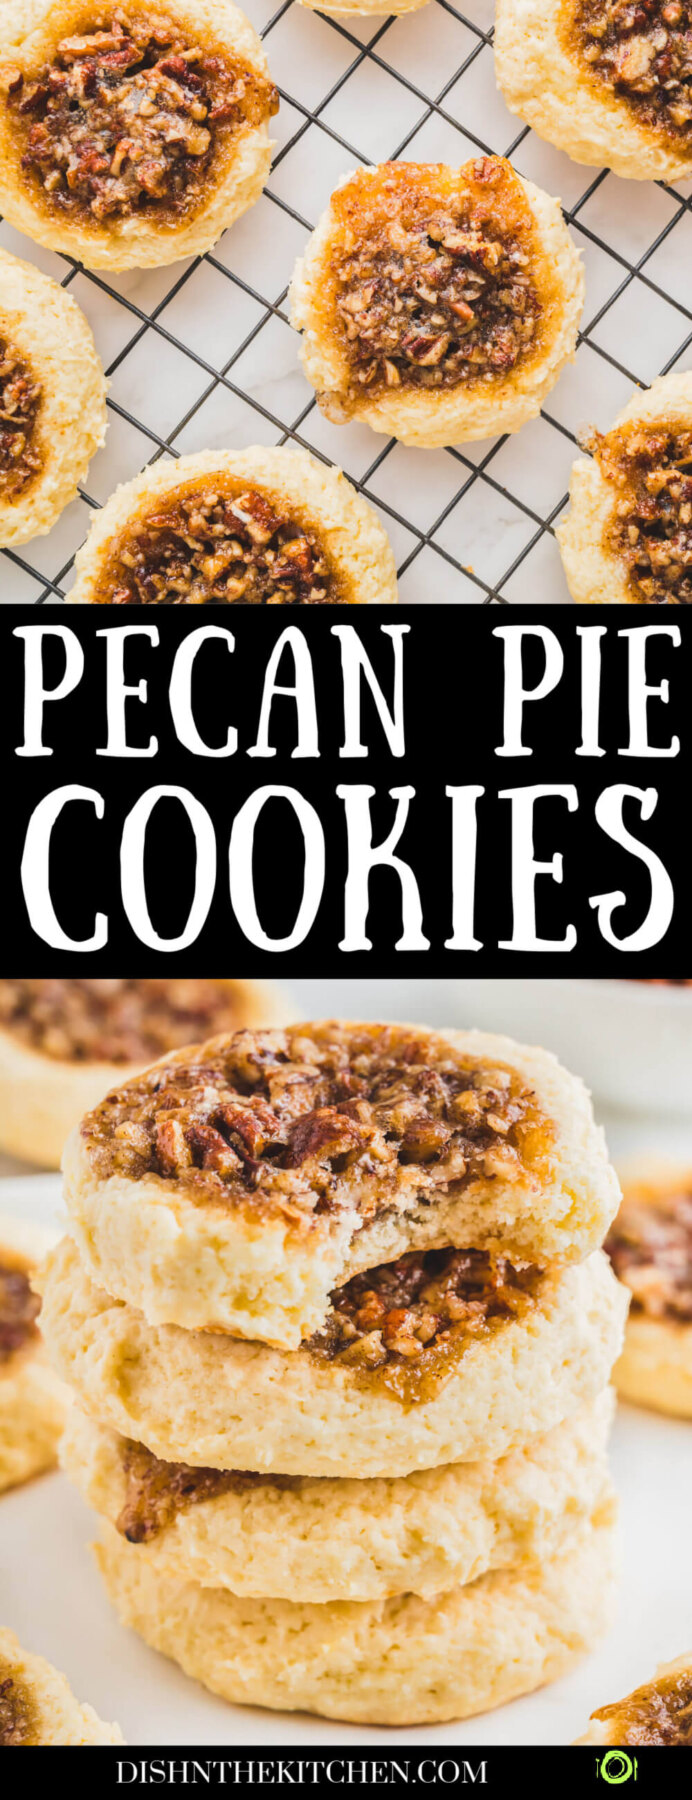 Pinterest image of buttery golden baked pecan pie cookies topped with caramel and chopped pecans.